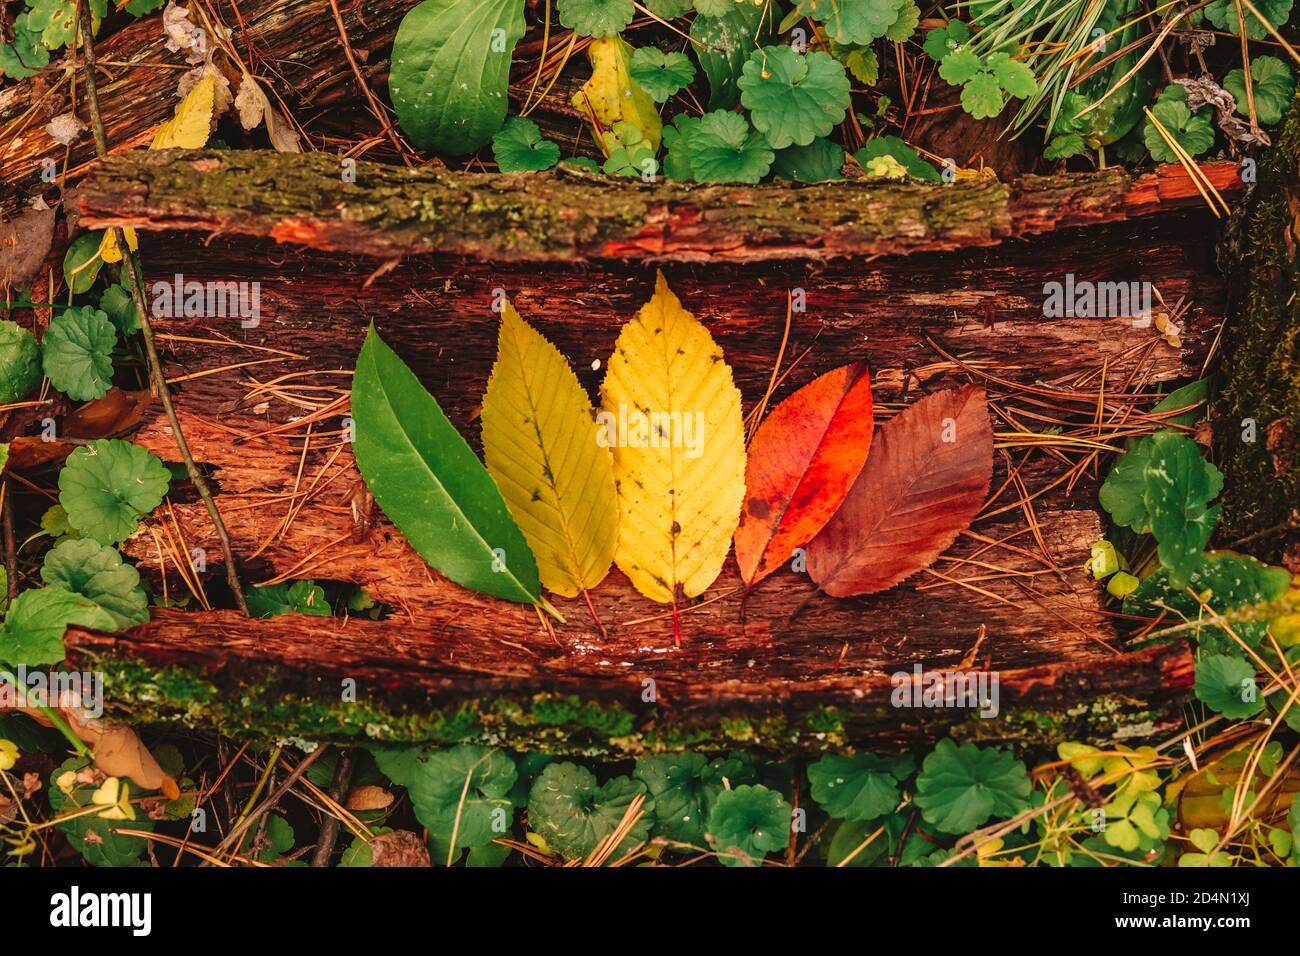 Fall season nature change: Autumn concept of leaves life cycle colorful leaves from green to yellow, red and brown Stock Photo